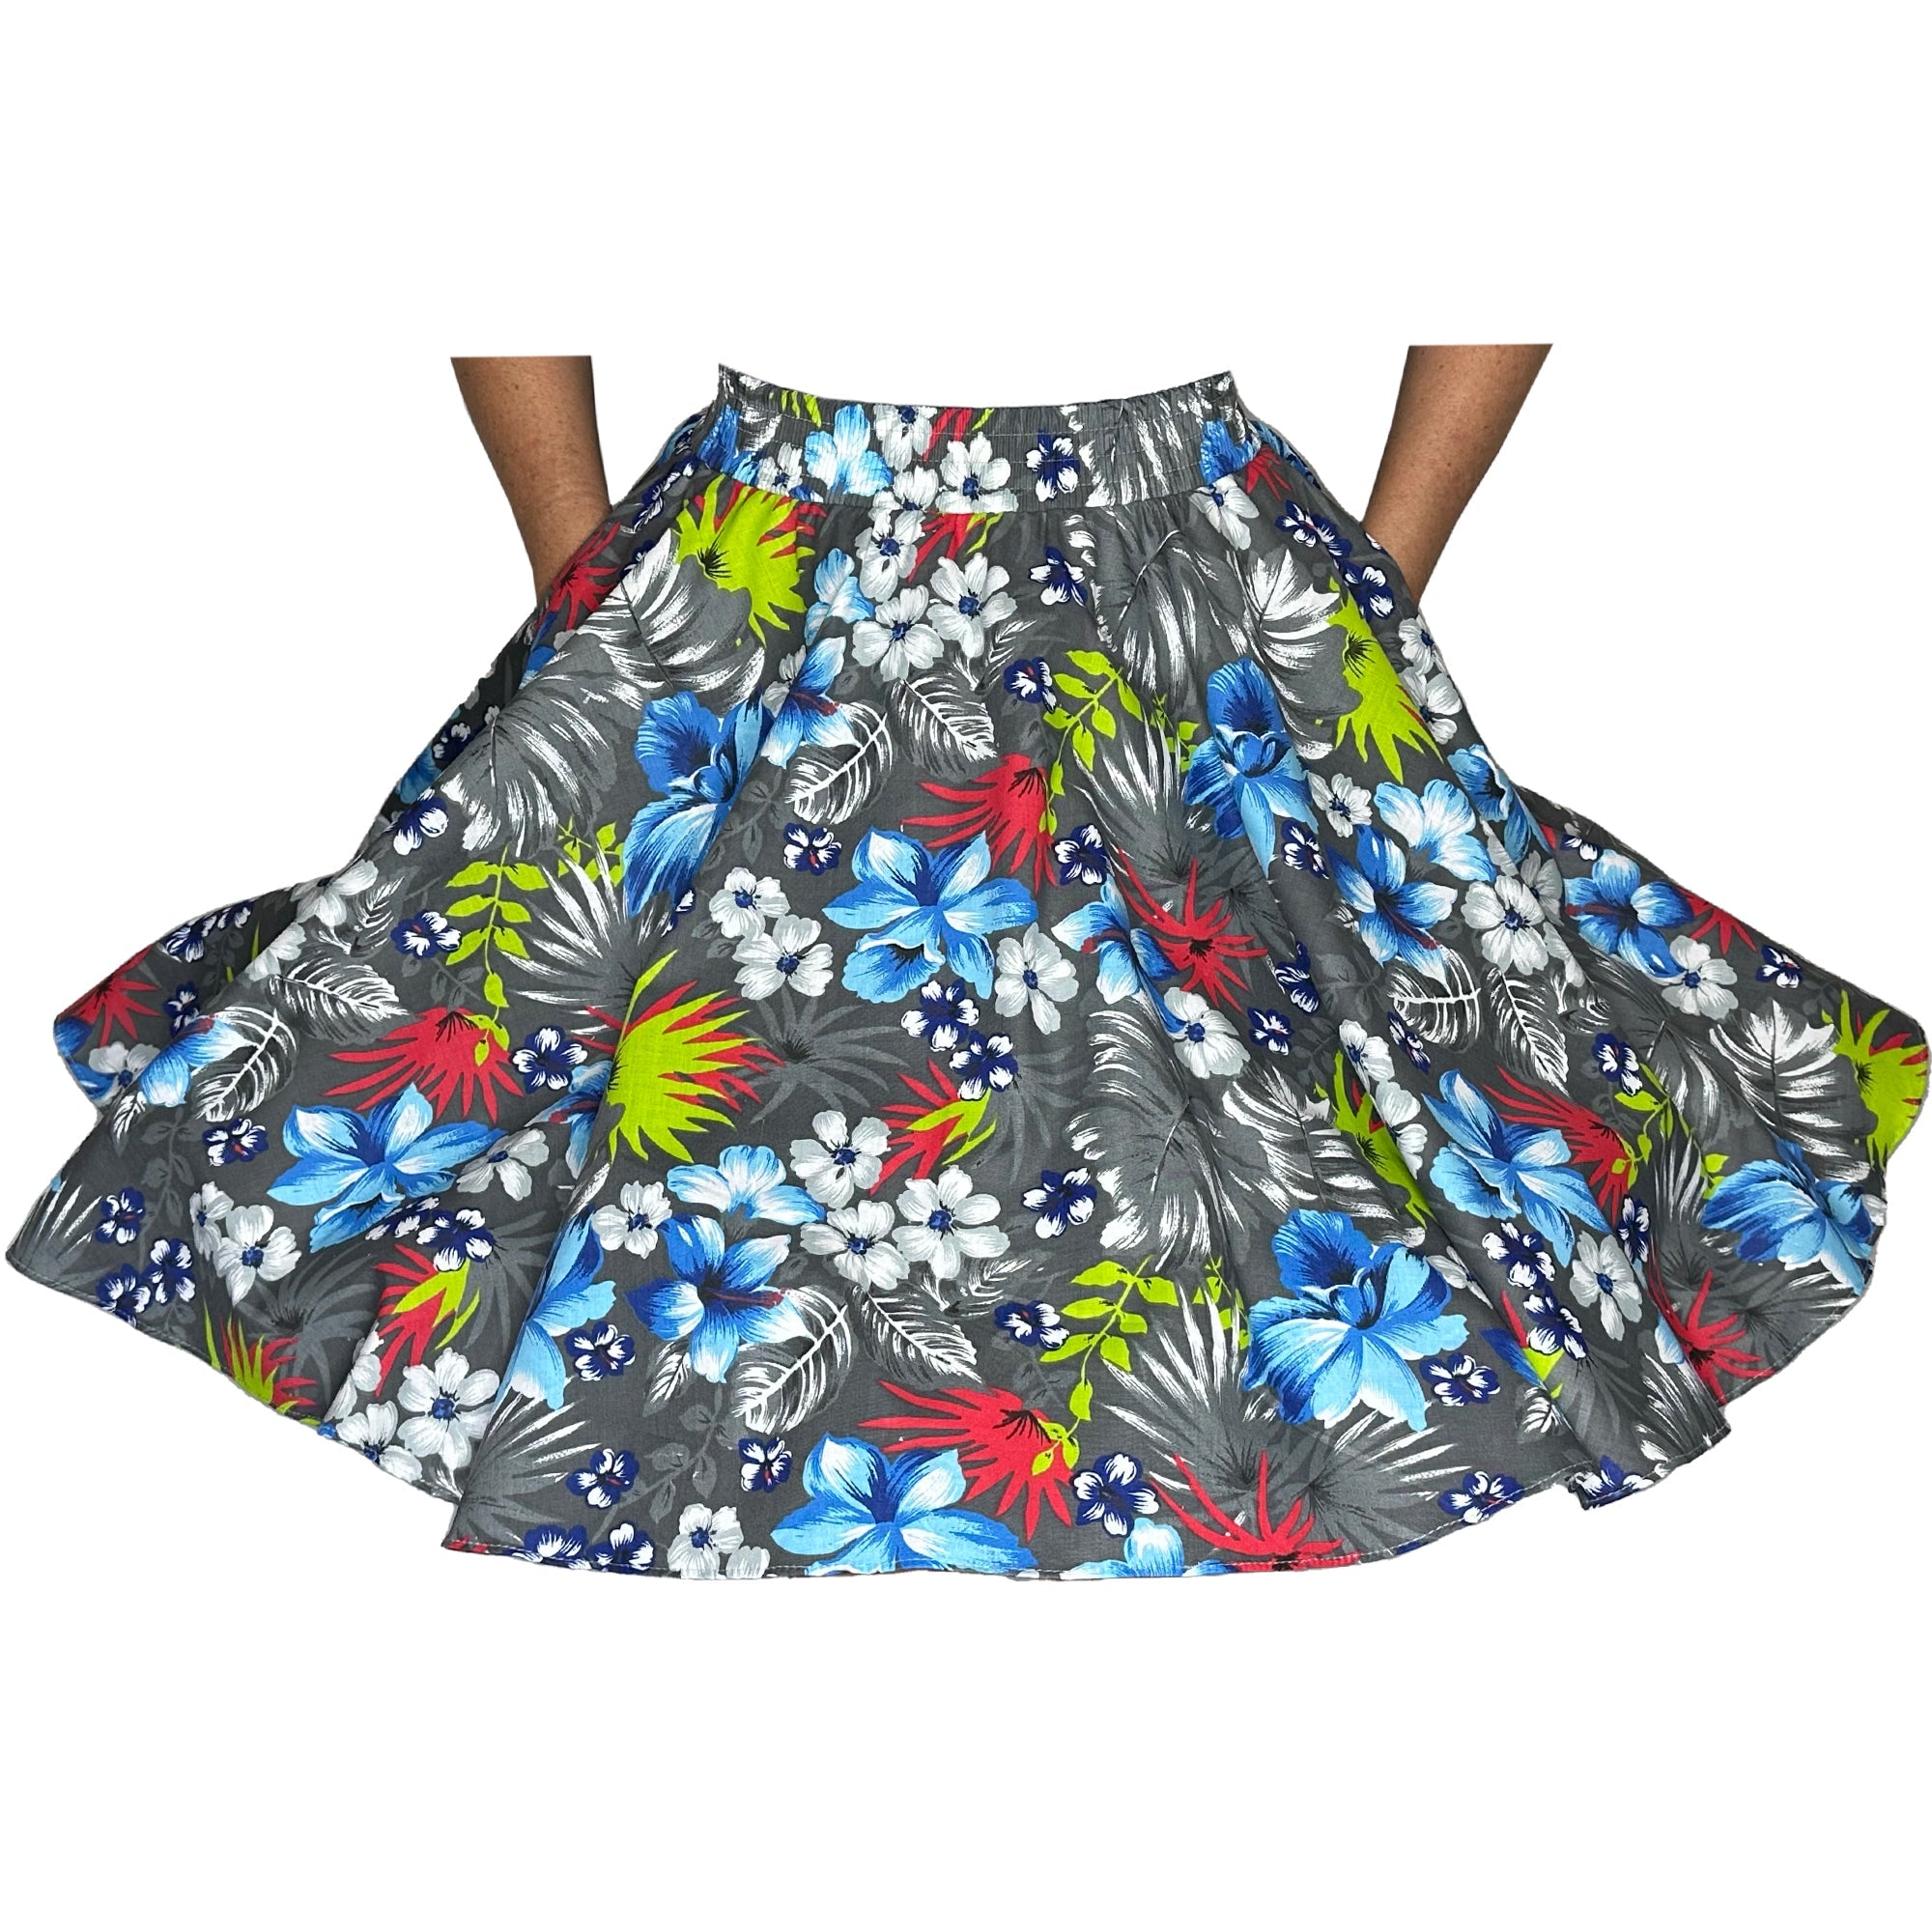 A person wearing a Tropical Hawaiian Square Dance Skirt by Square Up Fashions.